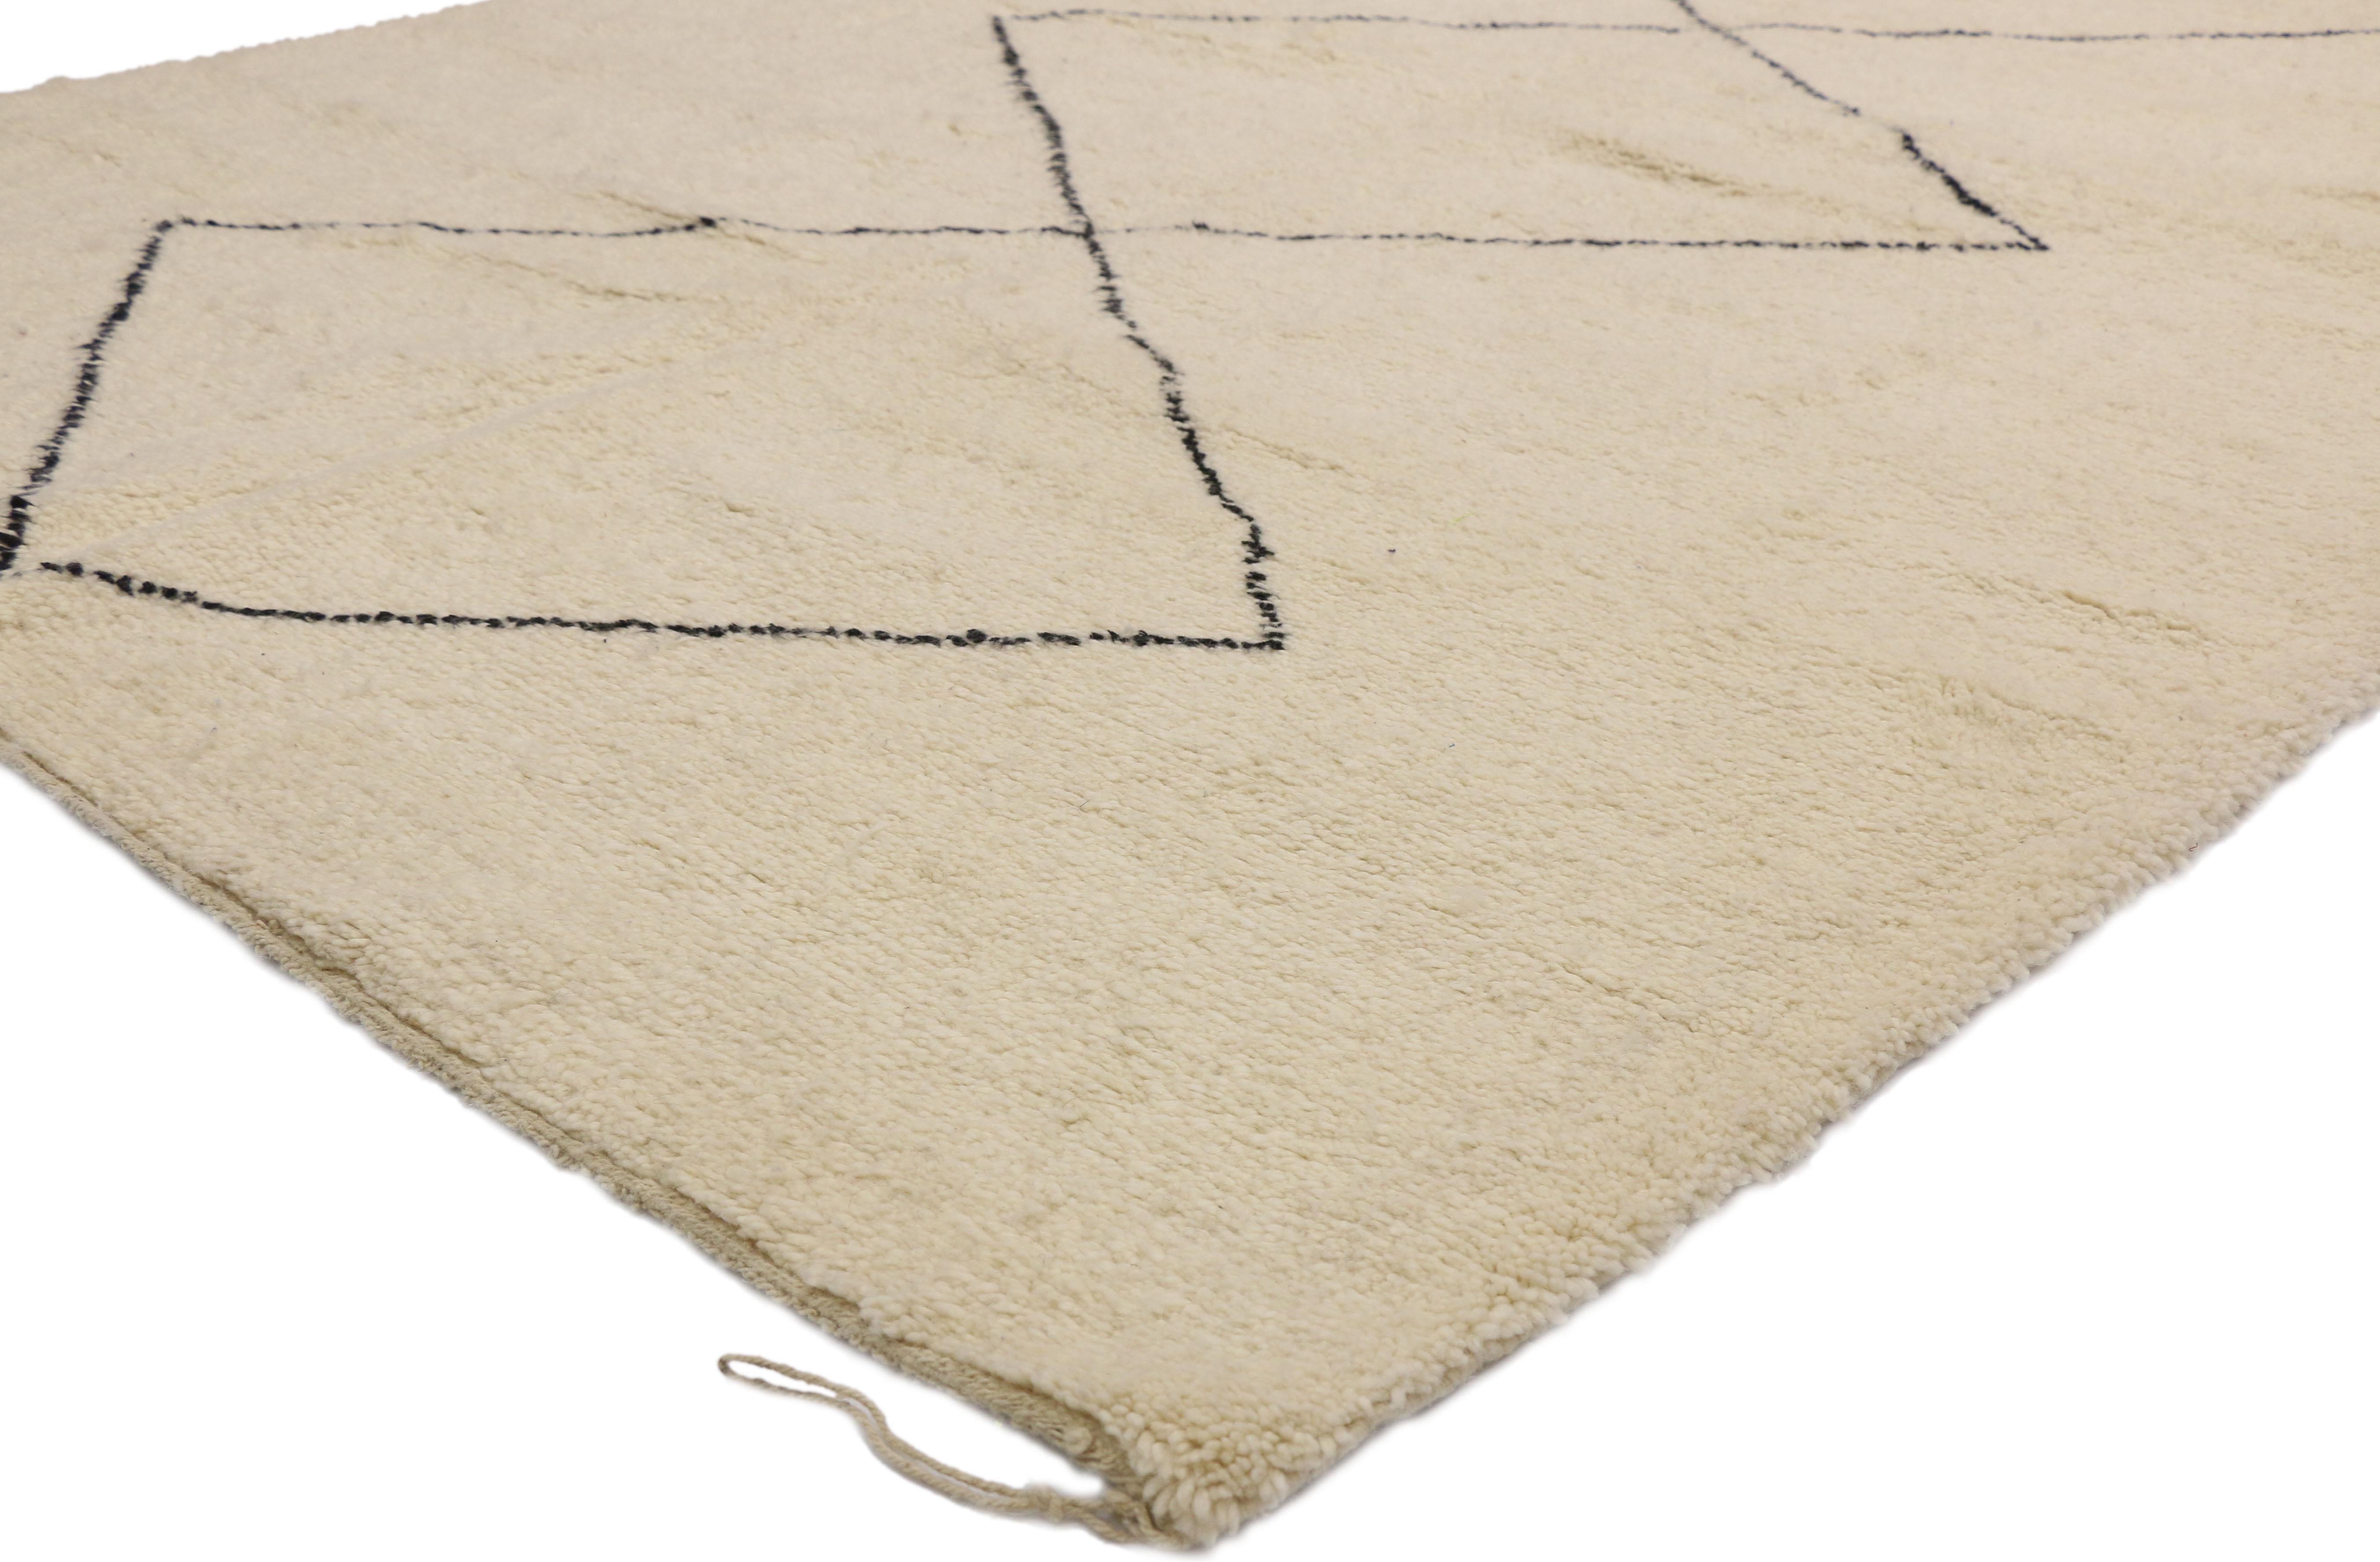 20787 Organic Modern Moroccan Beni Ourain Rug, 07'02 x 10'04. In the realm of Shibui design aesthetics, discover the allure of simplicity and refinement woven into this meticulously hand-knotted wool Moroccan Beni Ourain rug. A solitary column